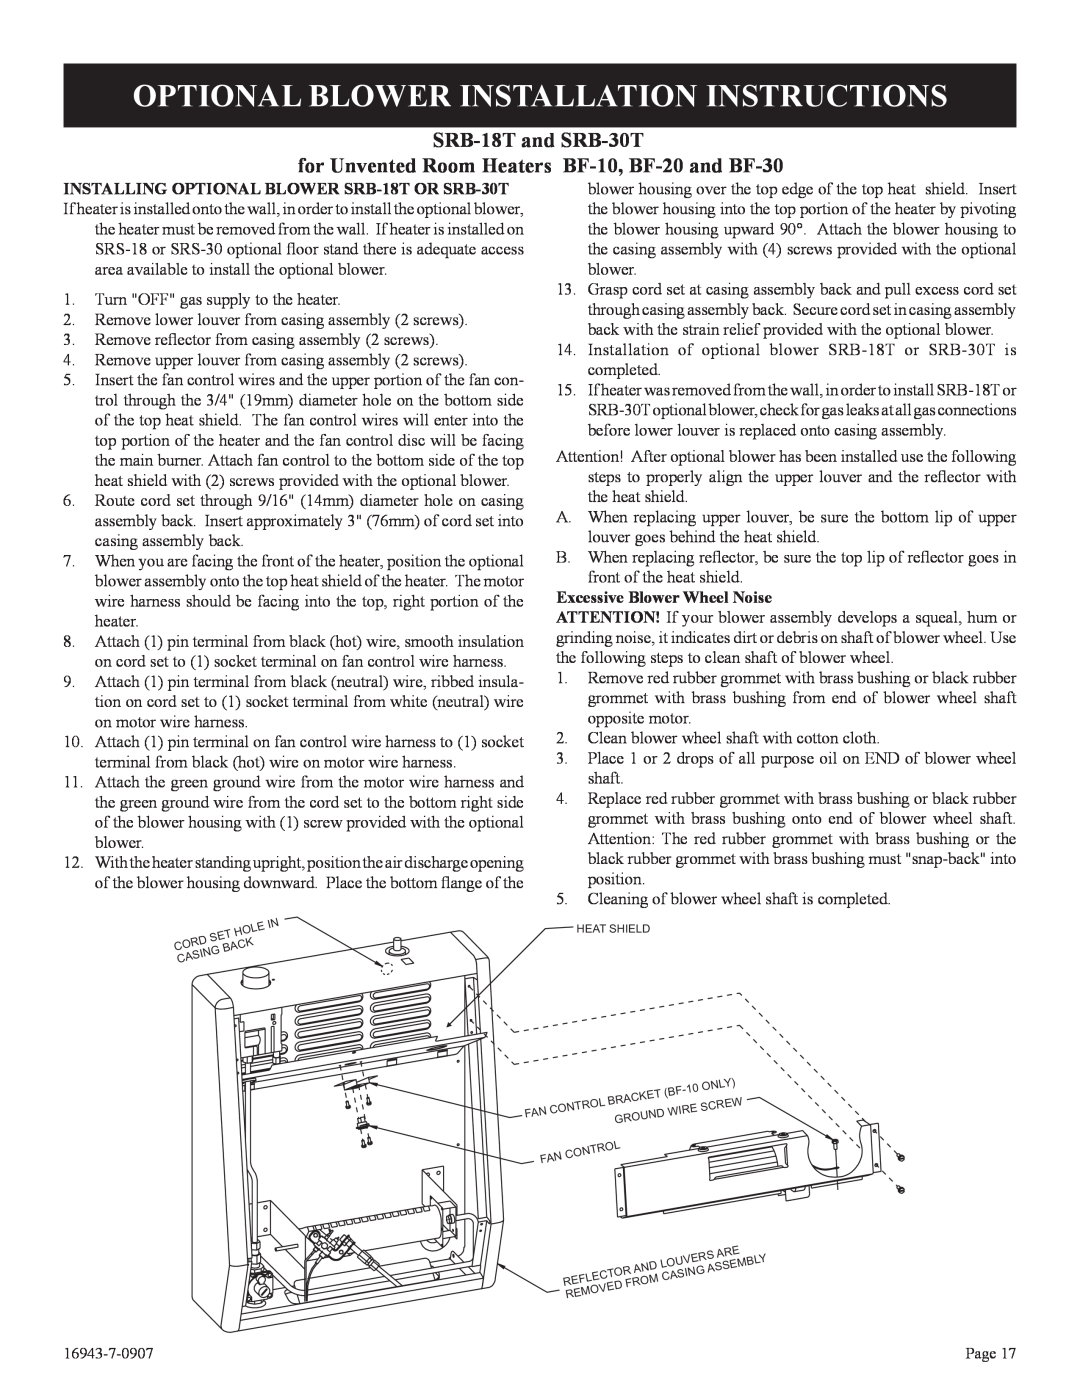 Empire Comfort Systems BF-10-2 Optional Blower Installation Instructions, SRB-18Tand SRB-30T, Excessive Blower Wheel Noise 